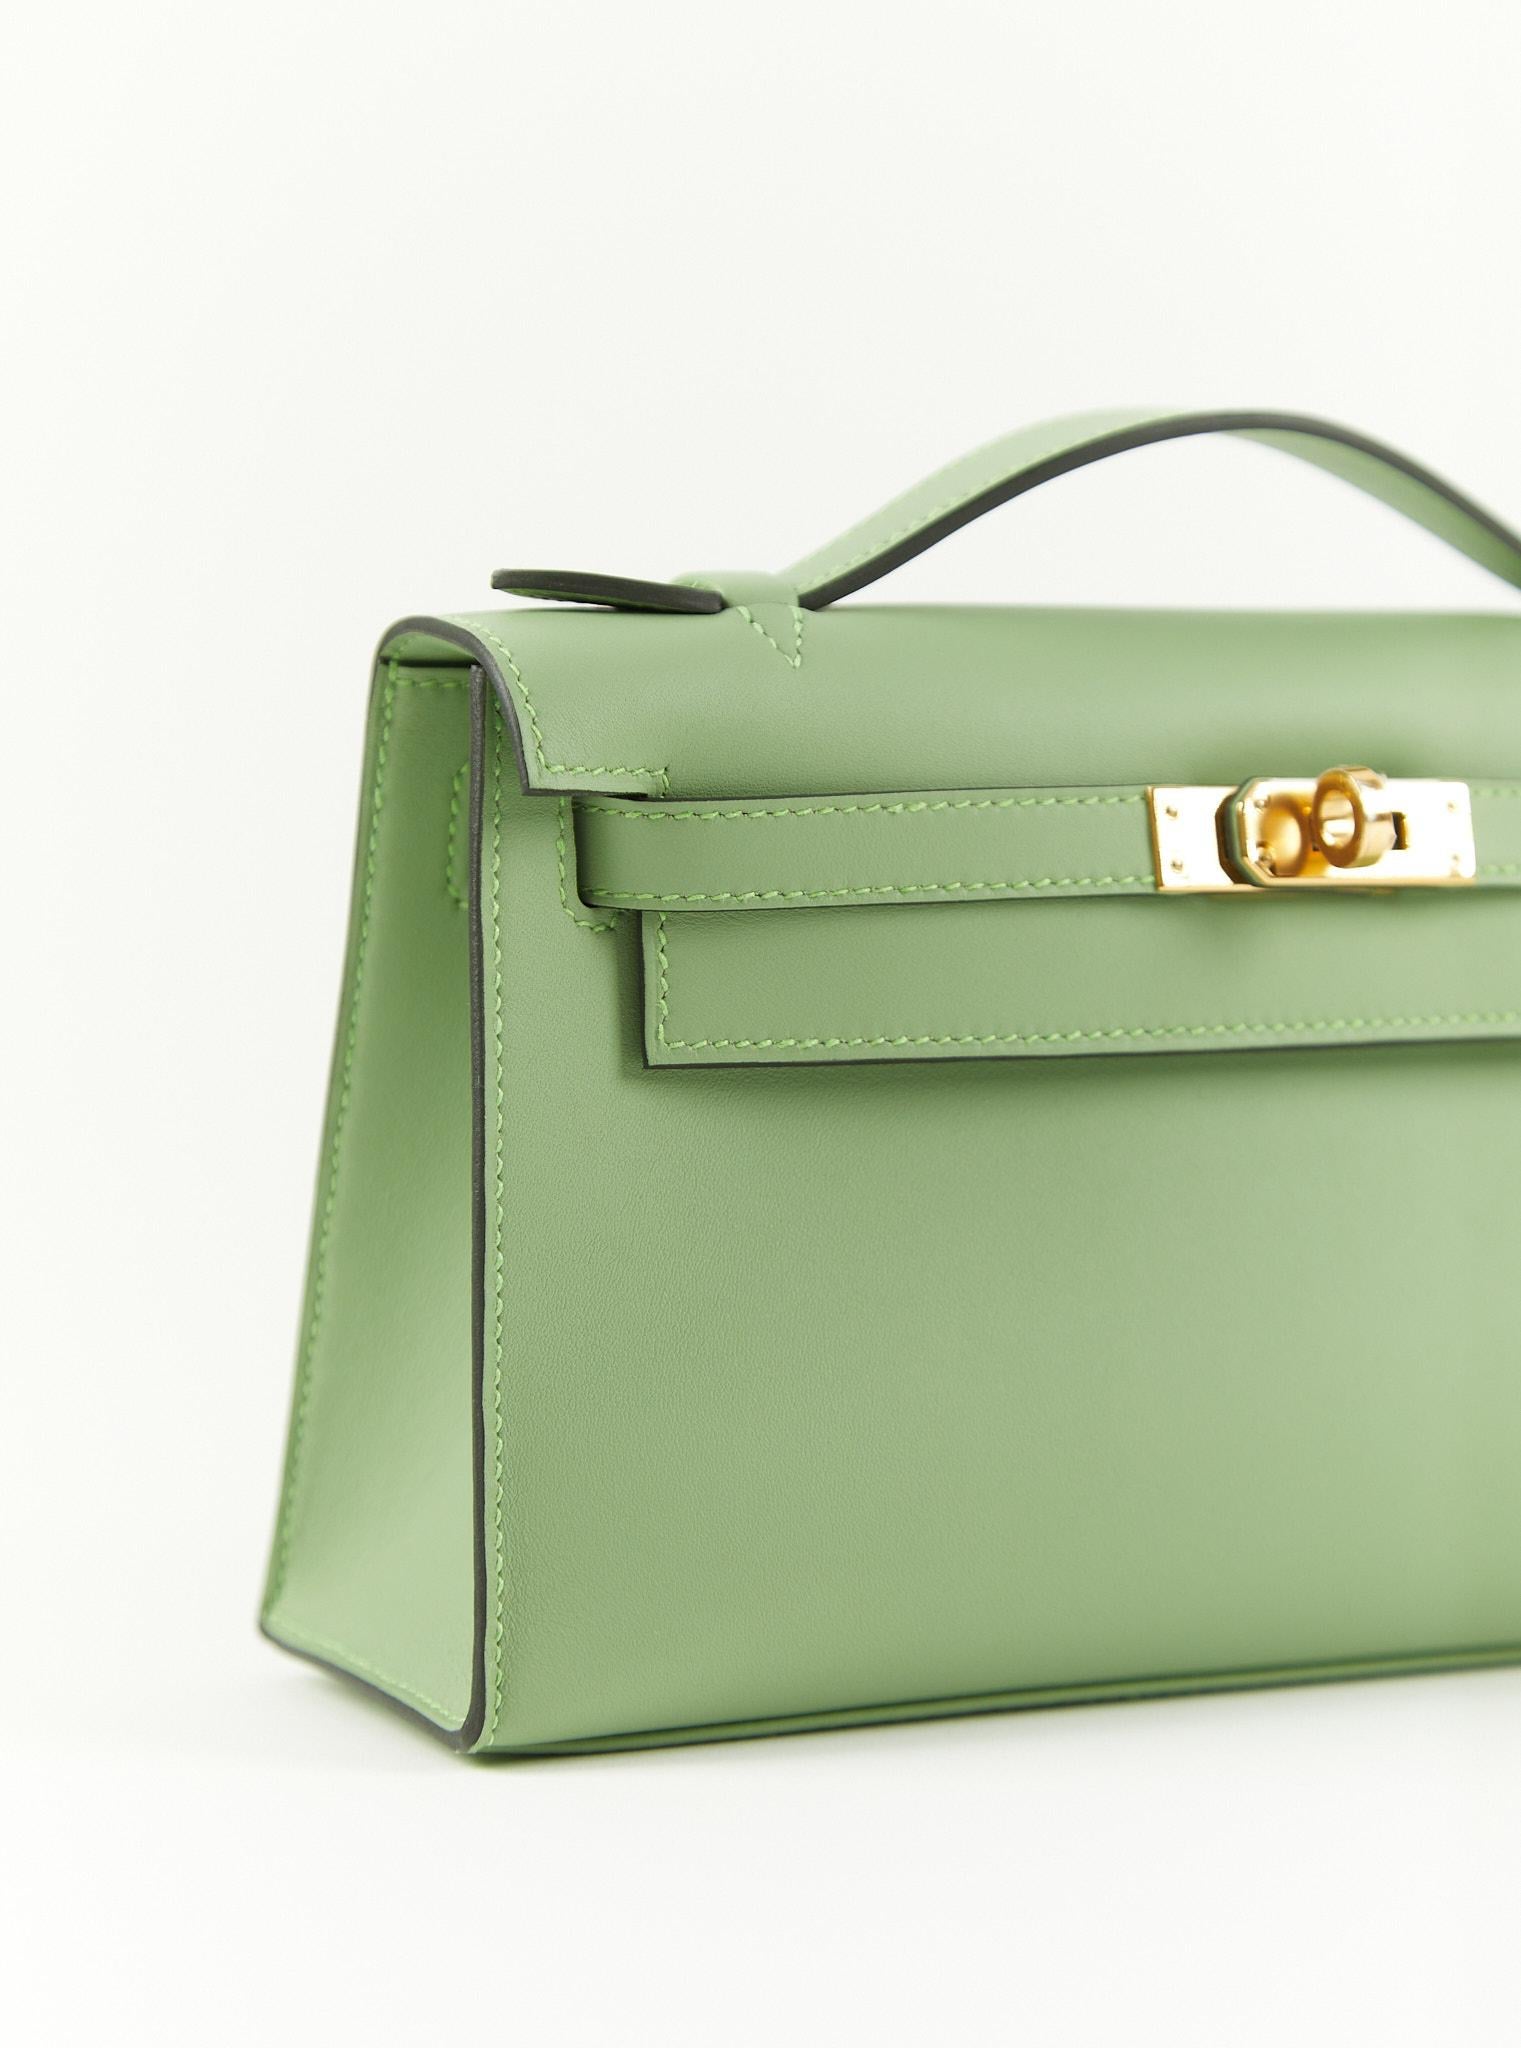 HERMÈS KELLY POCHETTE VERT CRIQUET Swift Leather with Gold Hardware In Excellent Condition For Sale In London, GB